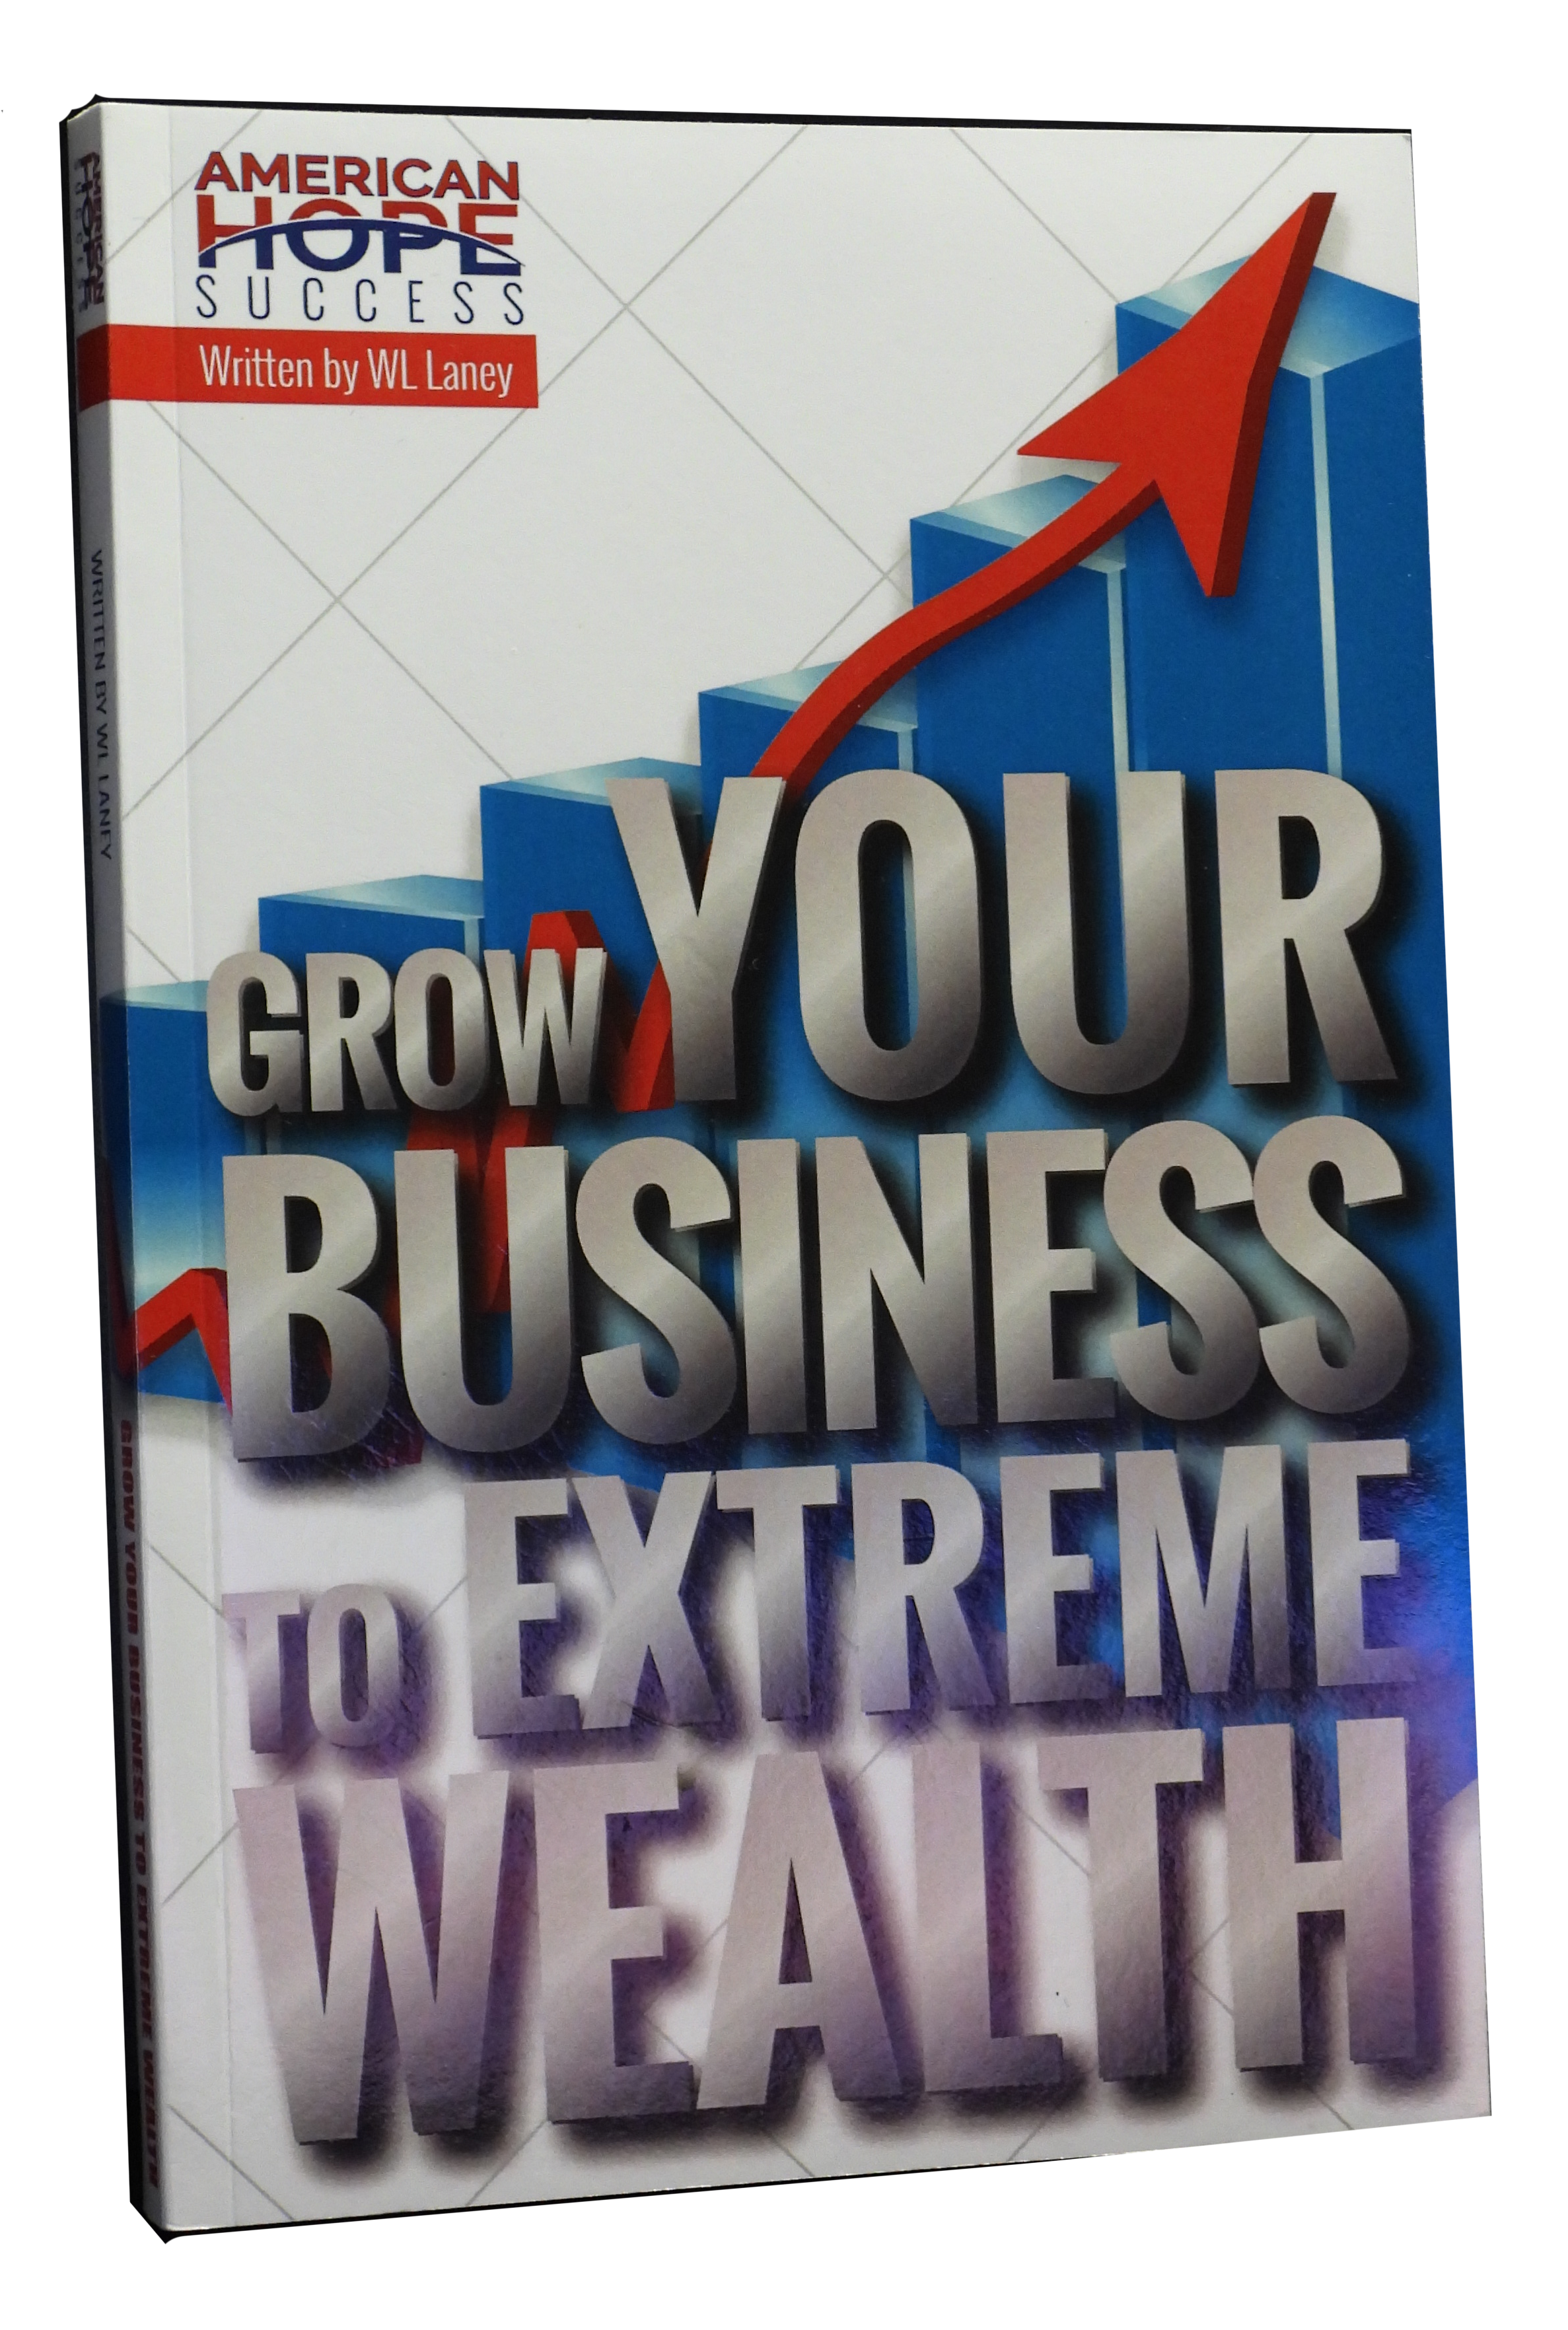 Grow Your Business to Extreme Wealth